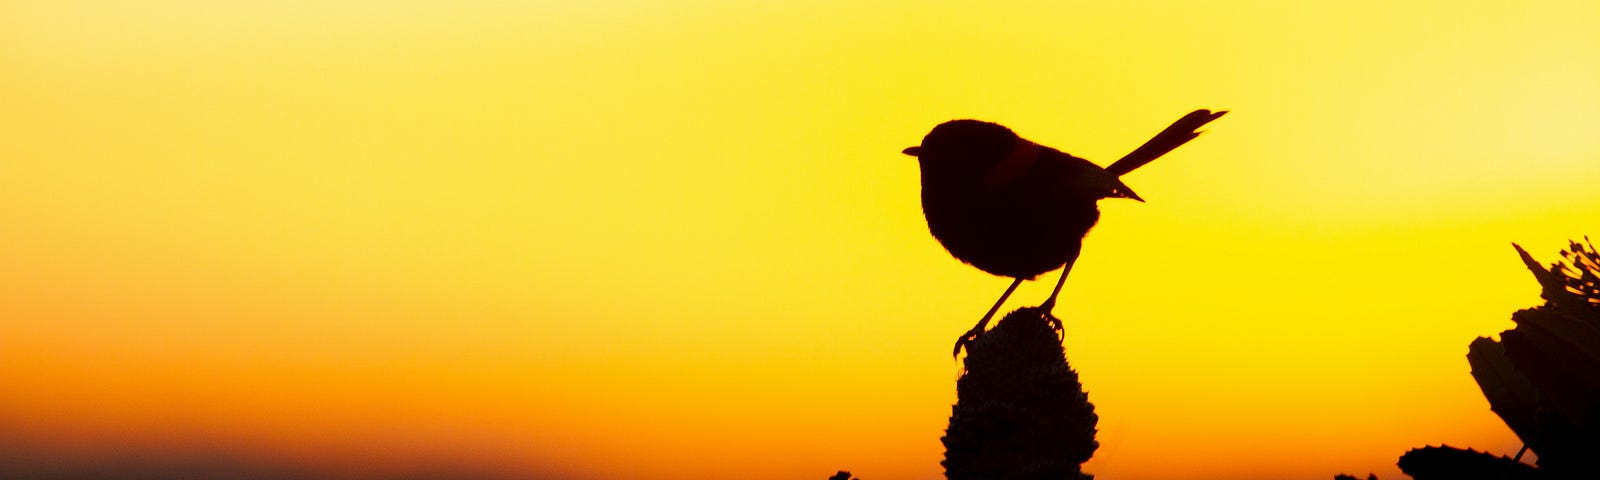 Silhouette of bird in front of the sunset